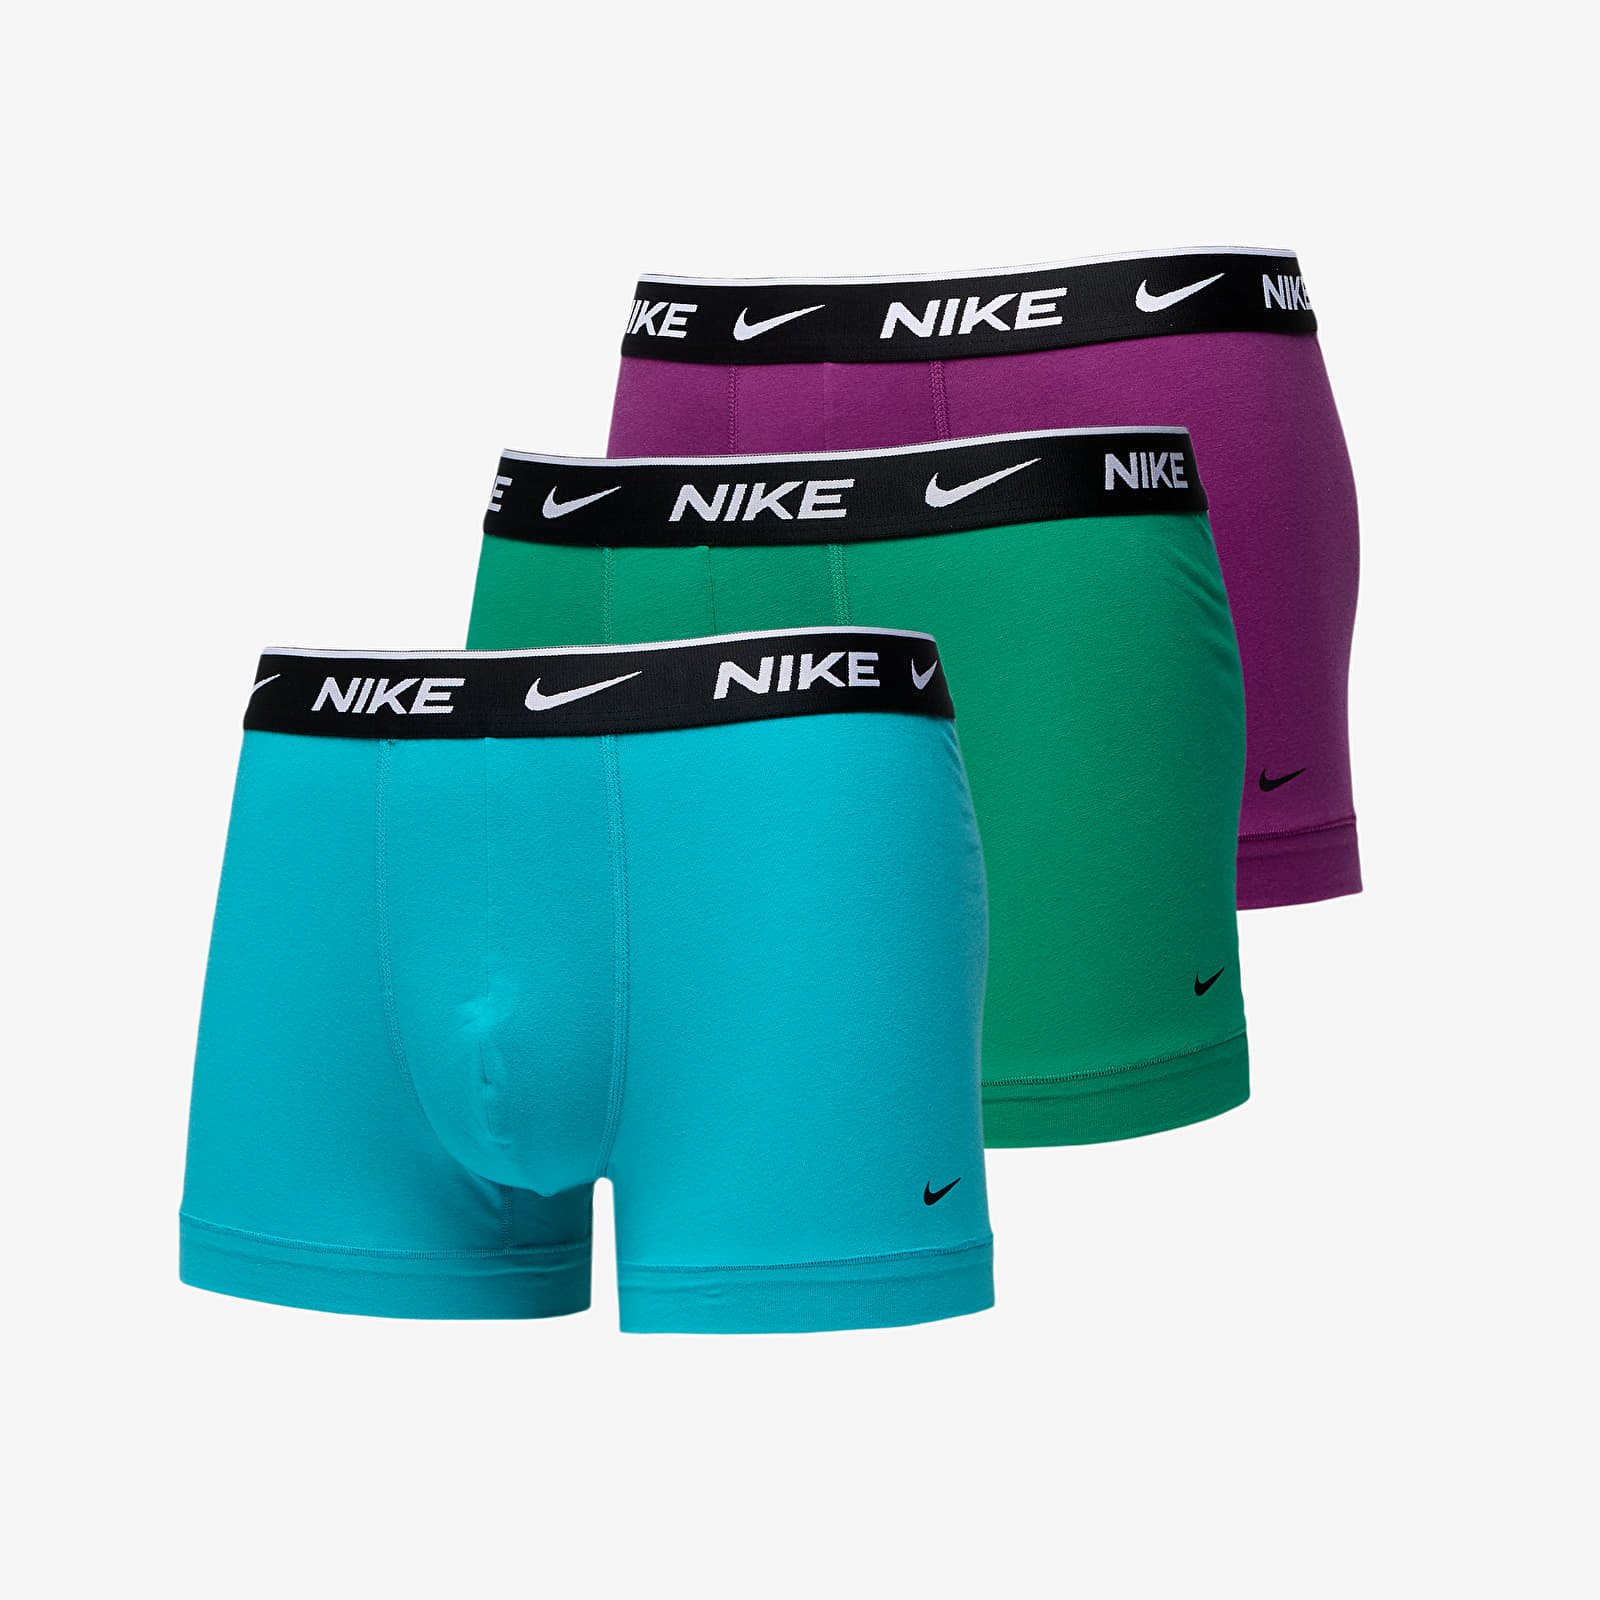 Boxer Nike Trunk 3-Pack Multicolor